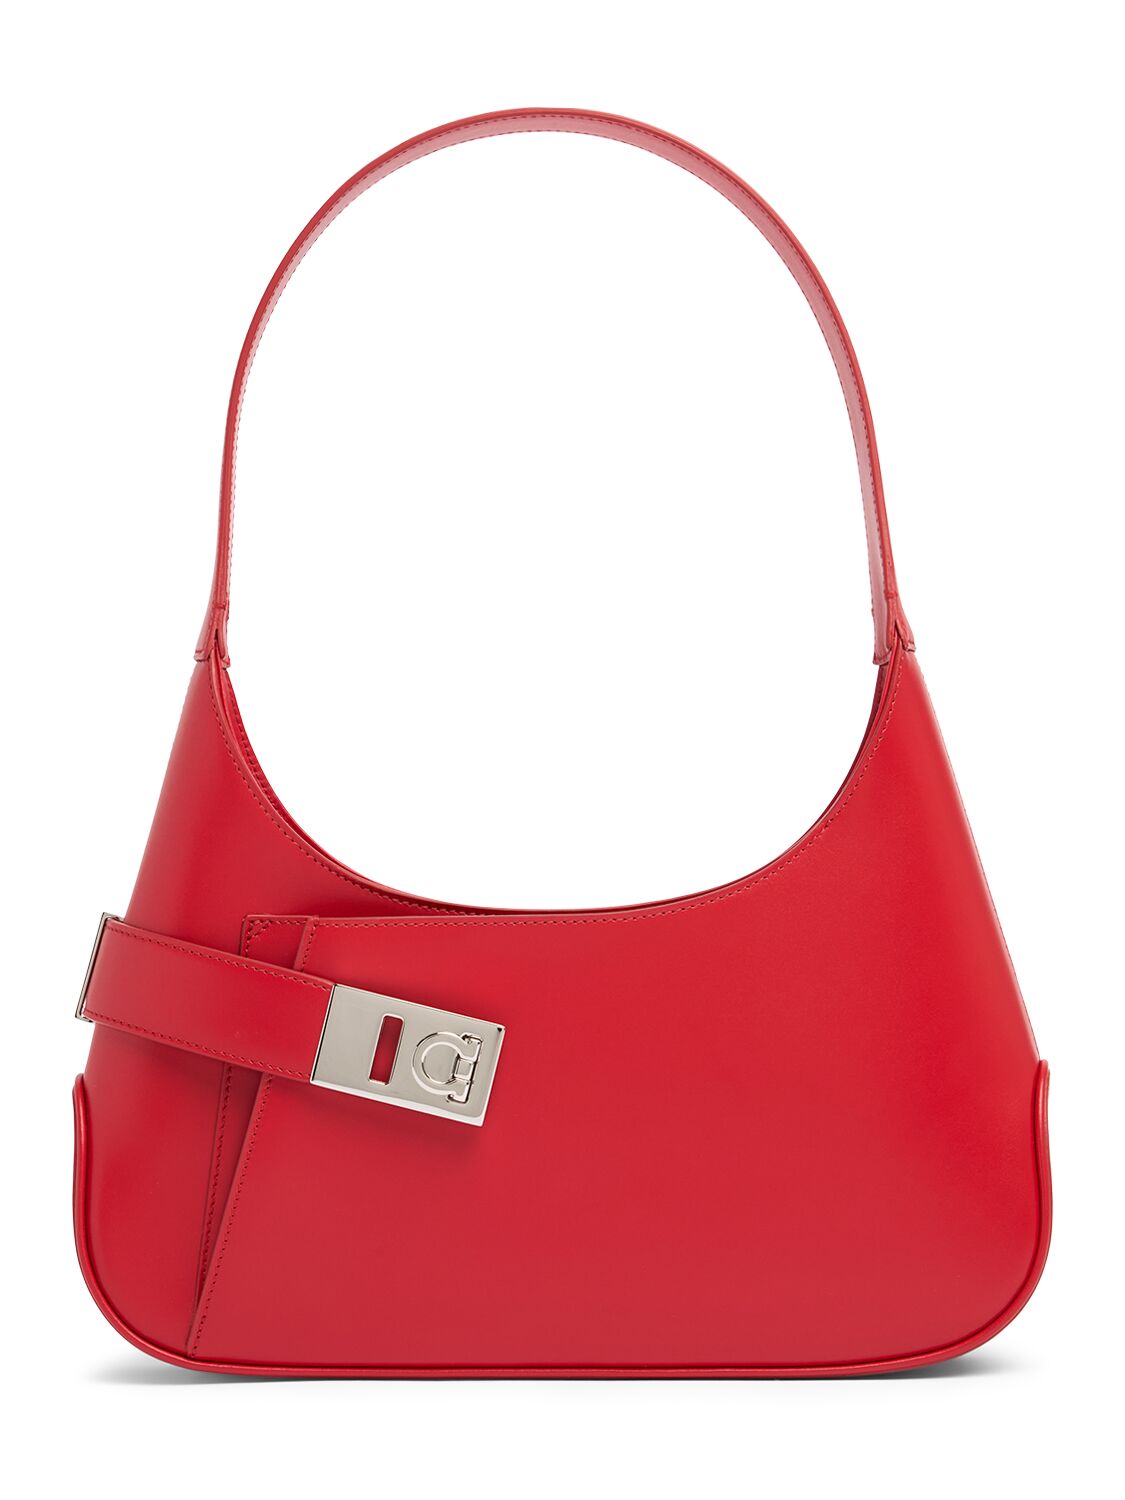 Ferragamo Small Archive Leather Shoulder Bag In Flame Red